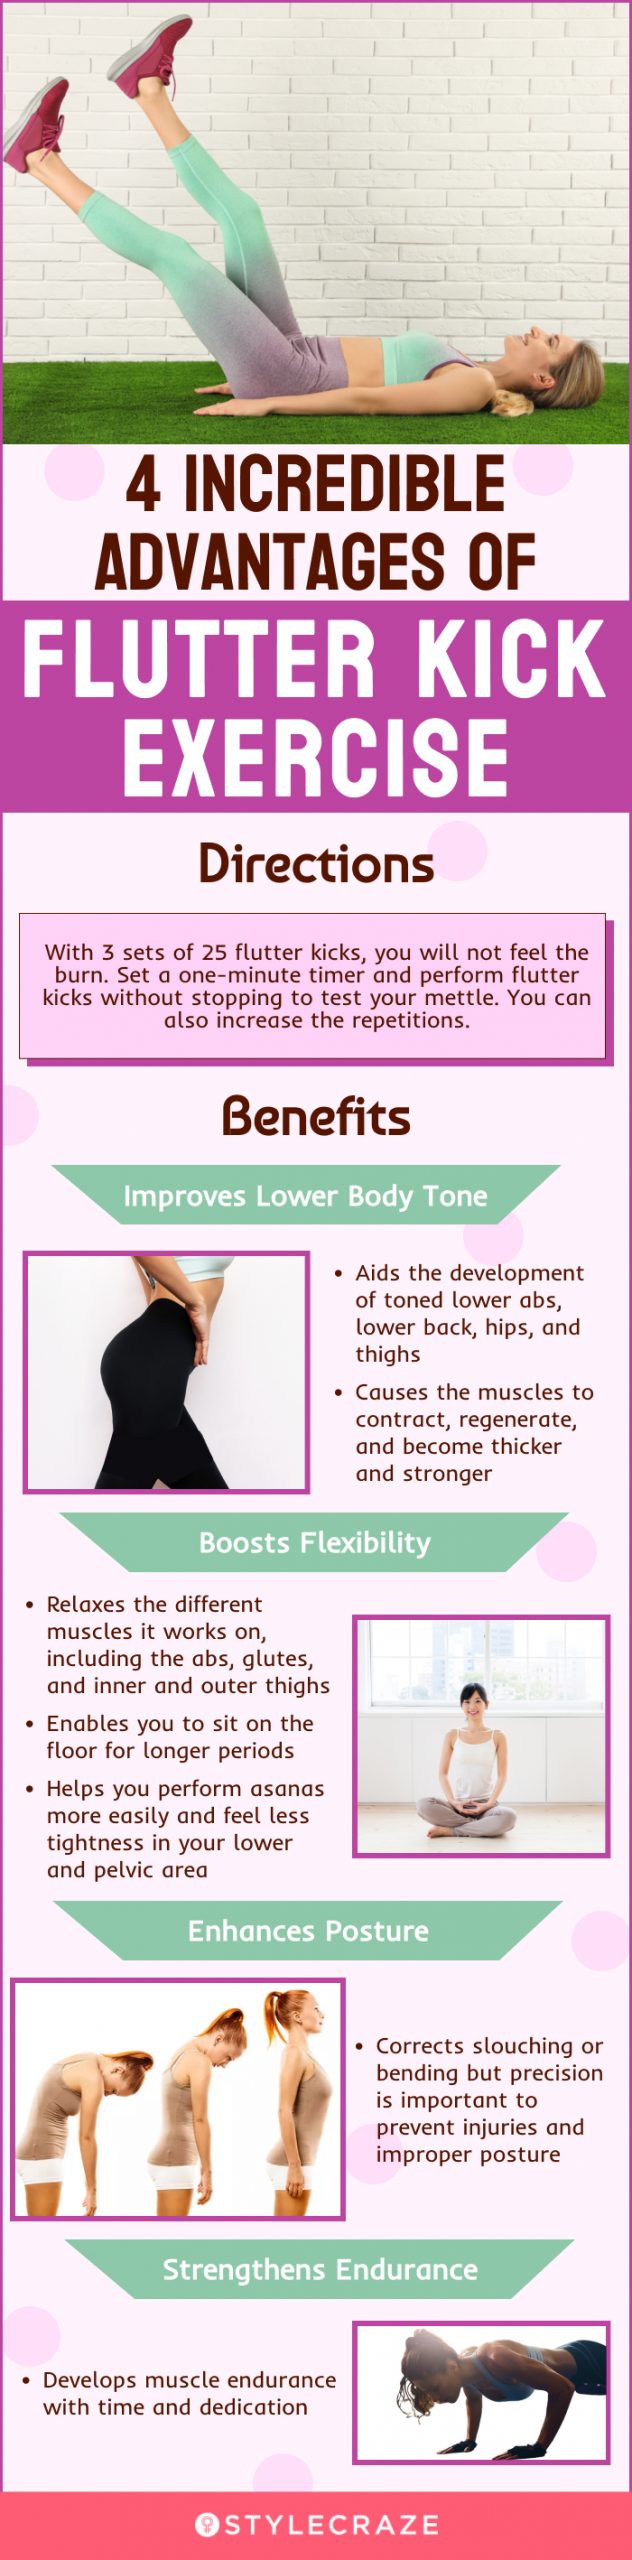 4 incredible advantages of flutter kick exercise(infographic)